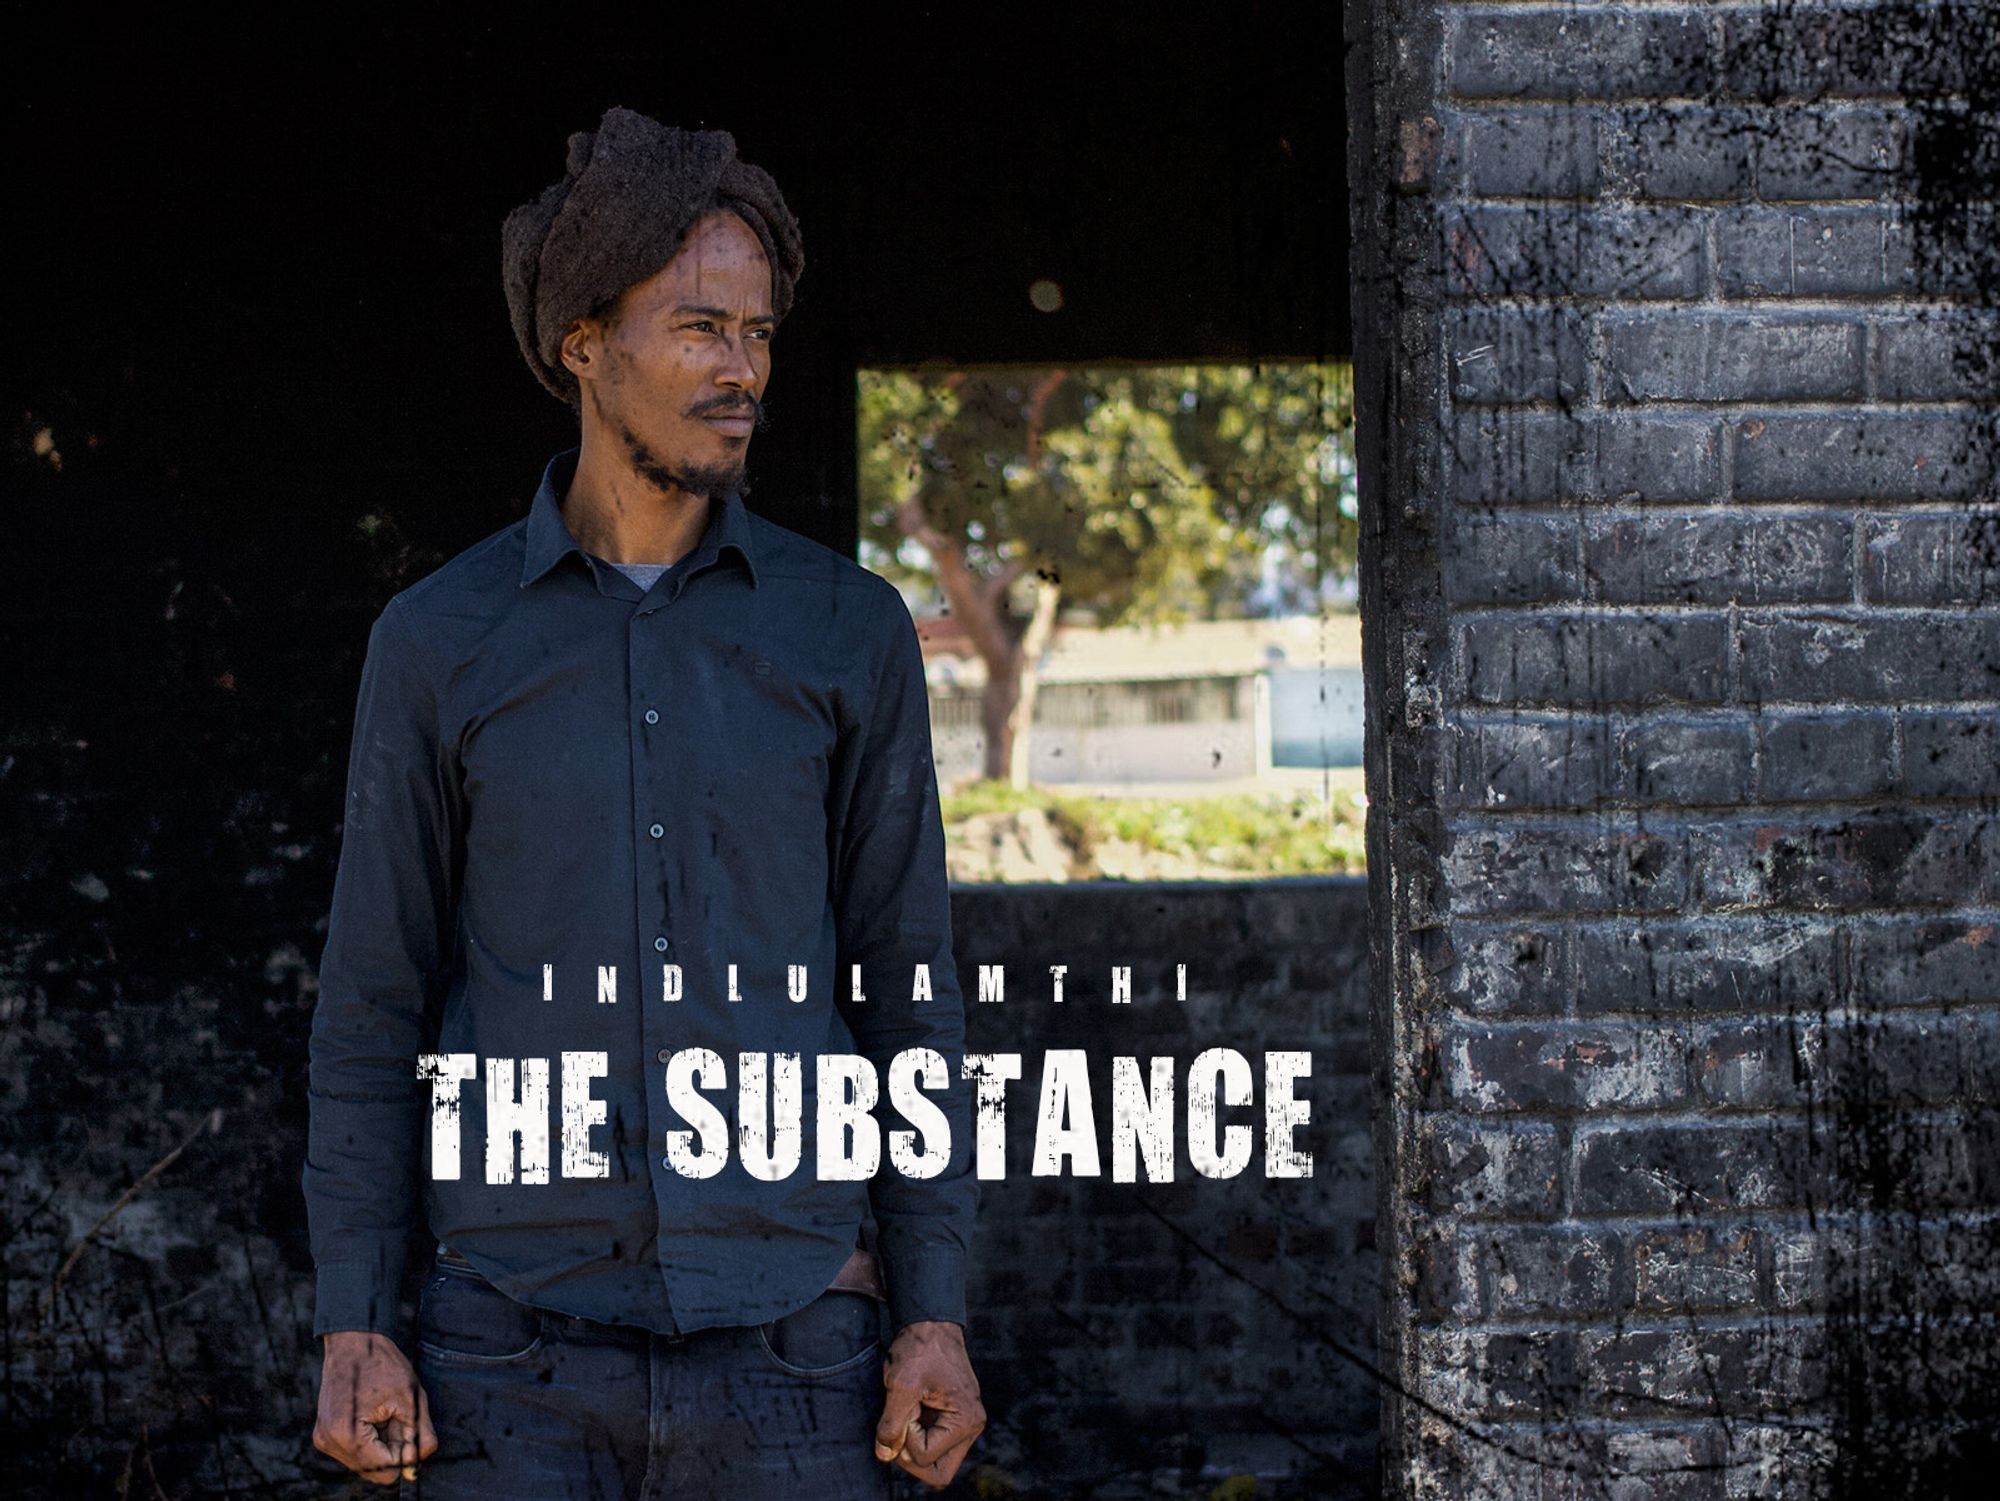 Ndlulamthi’s New EP ‘The Substance’ is an Insightful Pep Talk to The Black Man